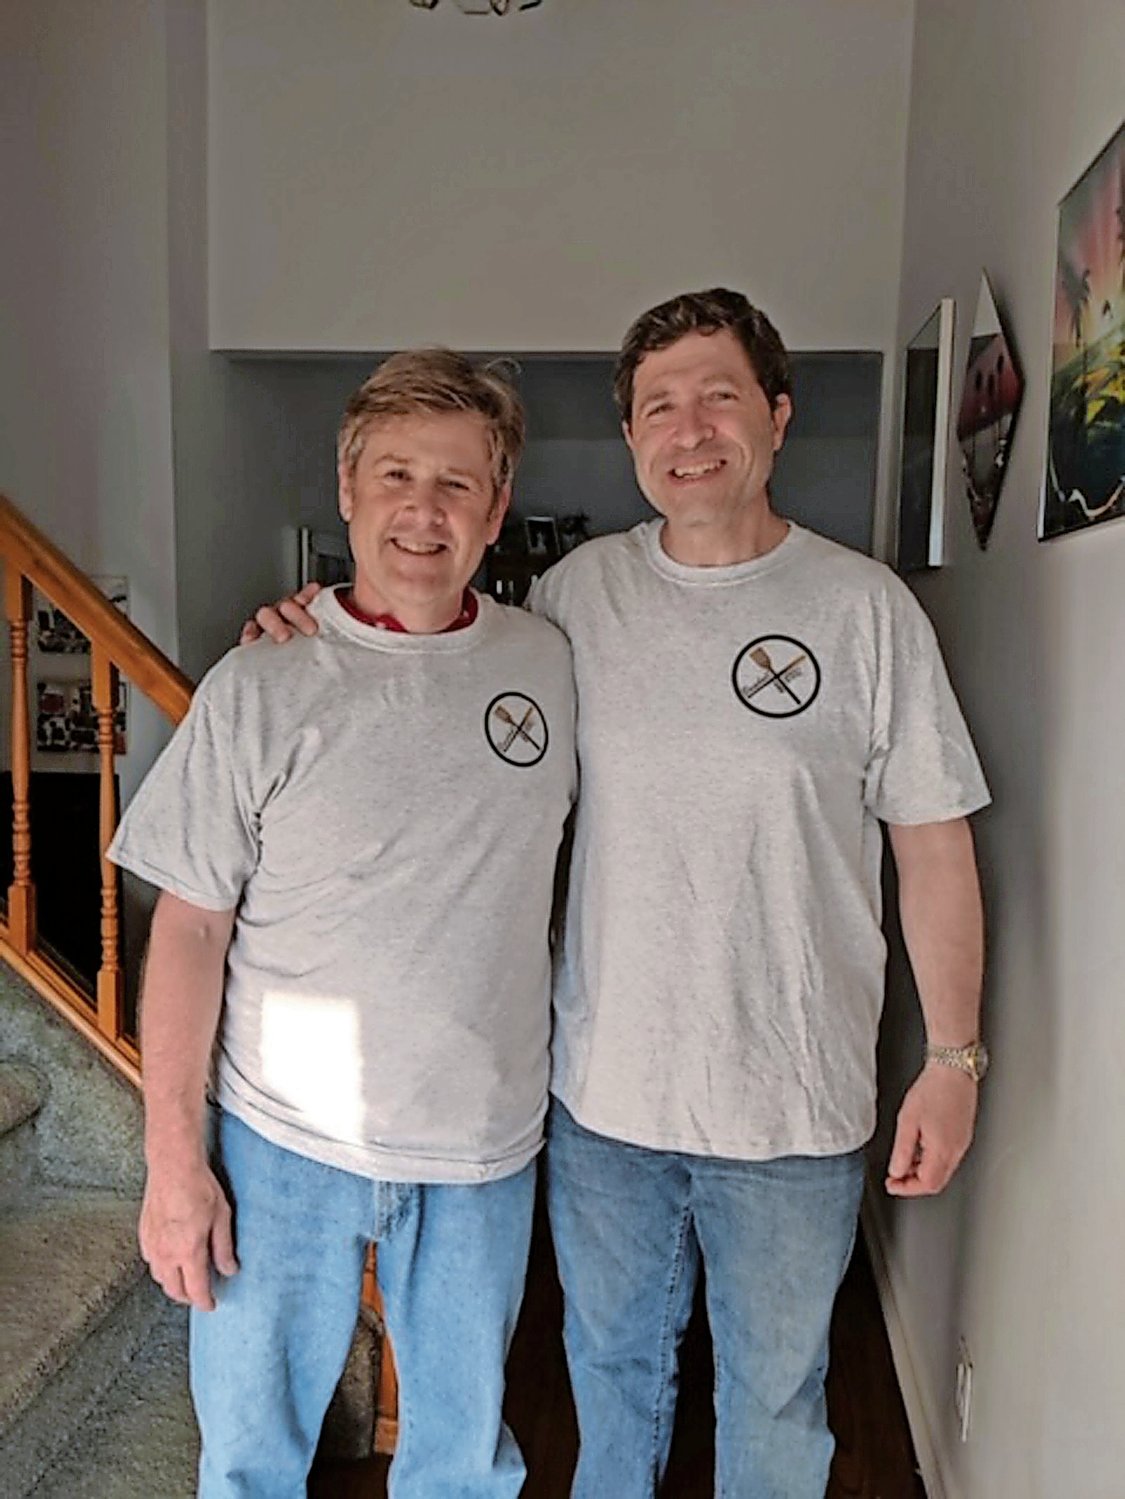 Jeff Cohen, 58, of Wantagh, left, and Leonard Aberman, 54, of Bellmore, started their podcast in December 2017.